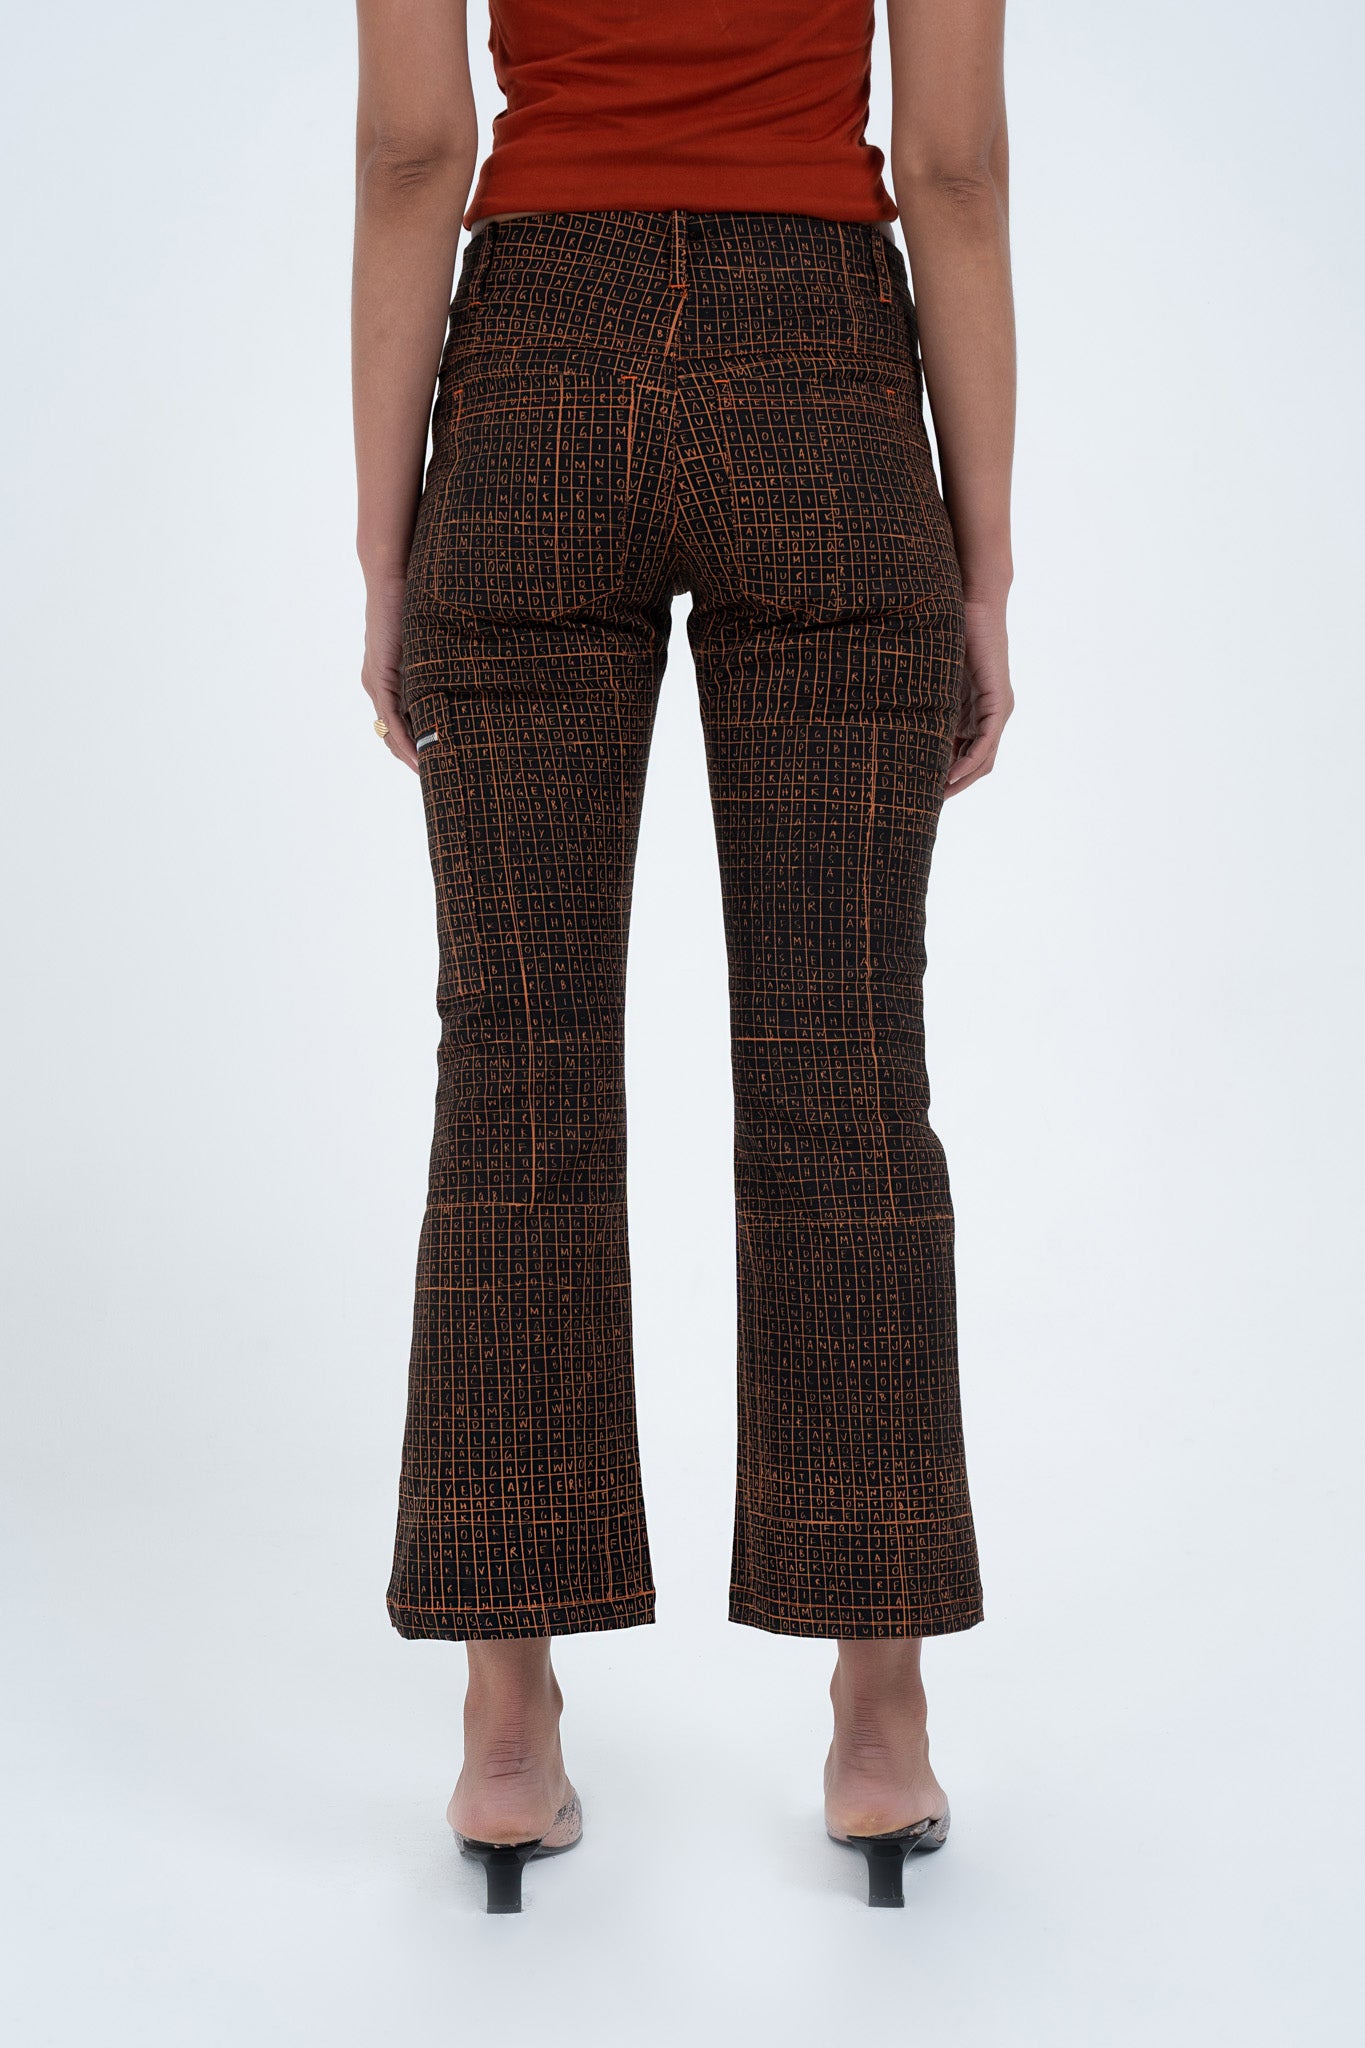 Arthur Apparel Flared Utility Pant - Find-a-Word